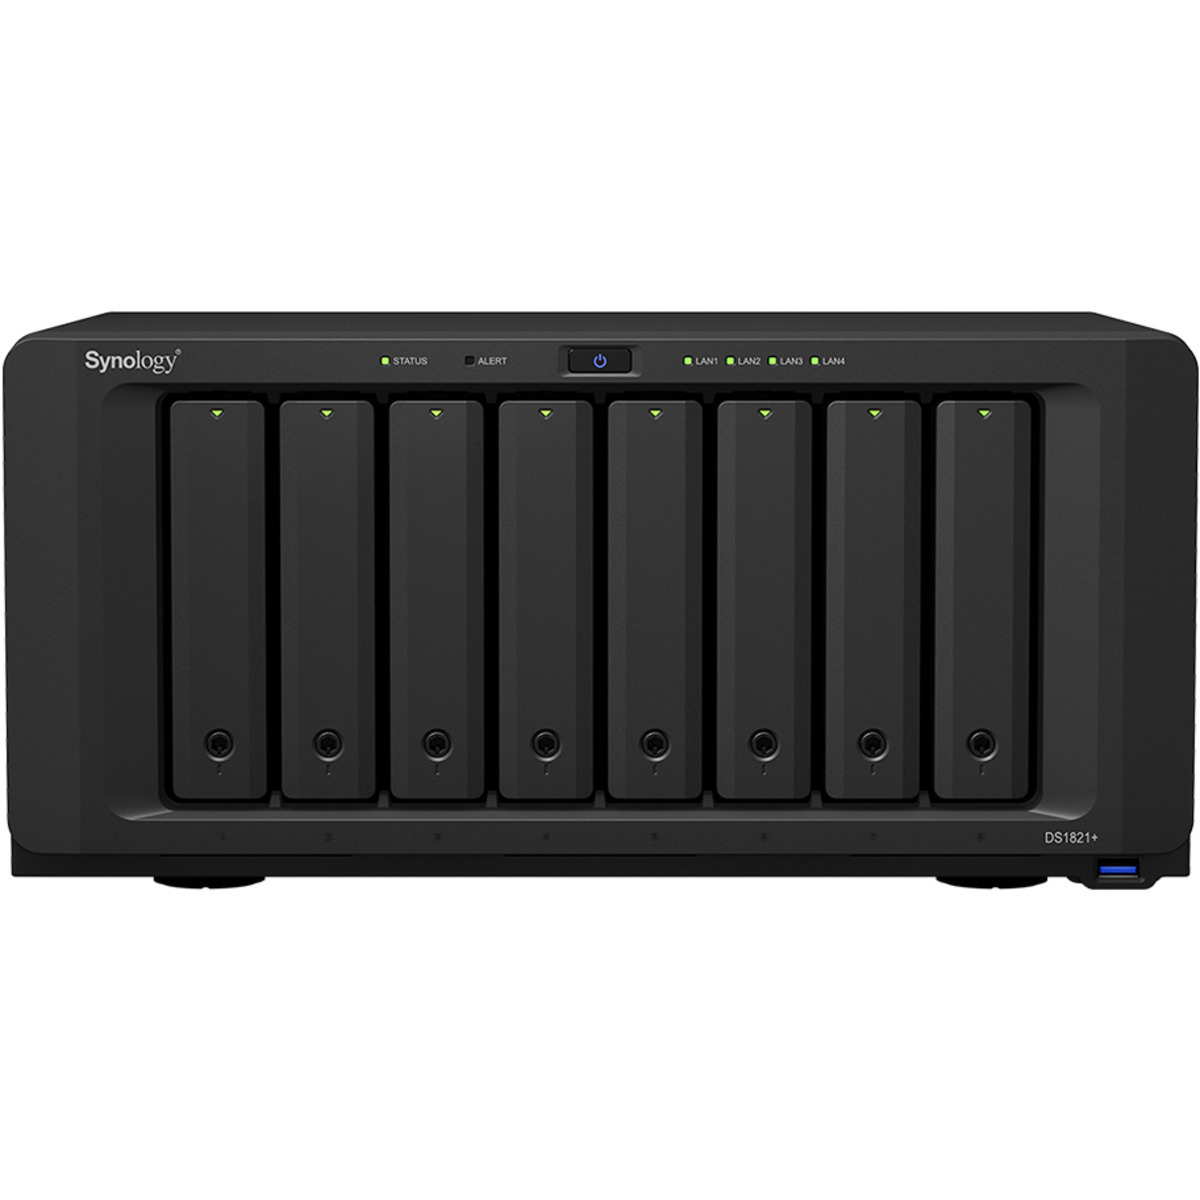 Synology DiskStation DS1821+ 84tb 8-Bay Desktop Multimedia / Power User / Business NAS - Network Attached Storage Device 7x12tb Seagate IronWolf Pro ST12000NT001 3.5 7200rpm SATA 6Gb/s HDD NAS Class Drives Installed - Burn-In Tested - ON SALE - FREE RAM UPGRADE DiskStation DS1821+